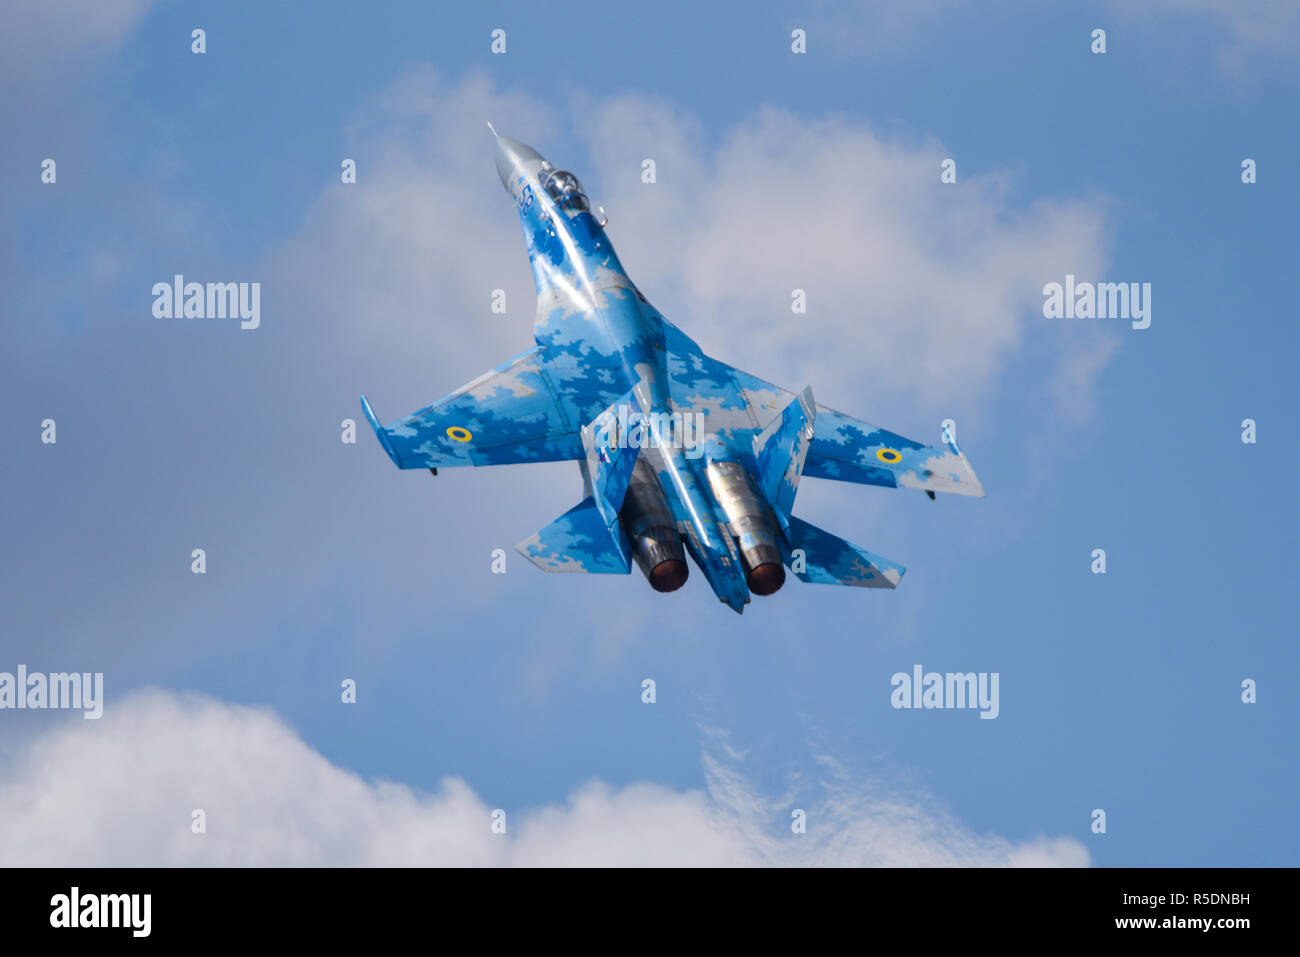 Ukrainian Air Force Sukhoi Su-27 Flanker fighter jet plane flying at the Royal International Air Tattoo, RIAT, RAF Fairford airshow. Soviet Russian Stock Photo